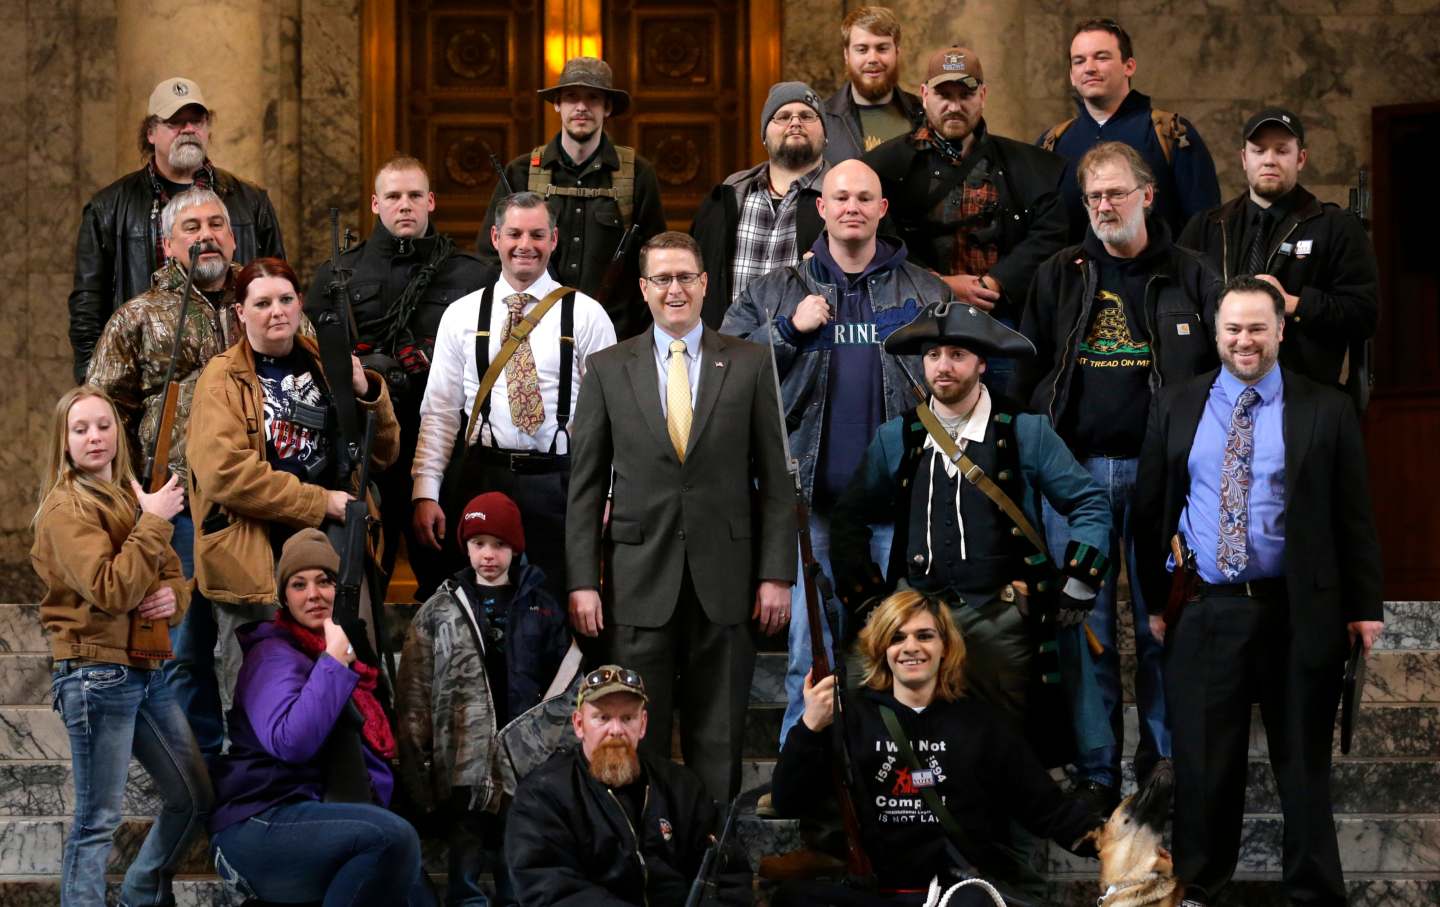 Matt Shea poses with gun-rights activists in a group photo